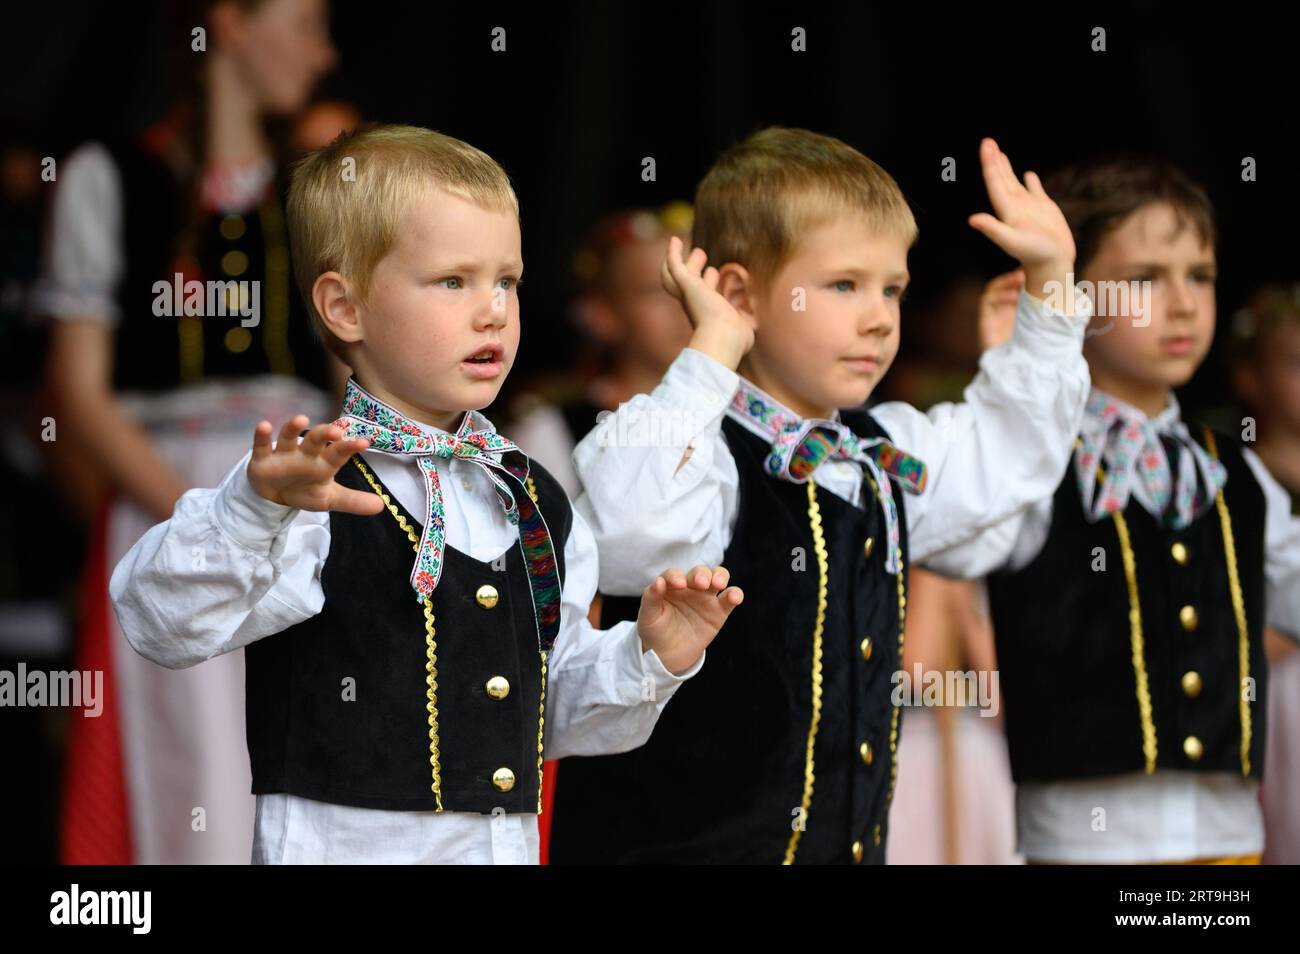 Czech and Slovak children performing traditional Czech and Slovak songs and dances at an event in Luxembourg. Stock Photo